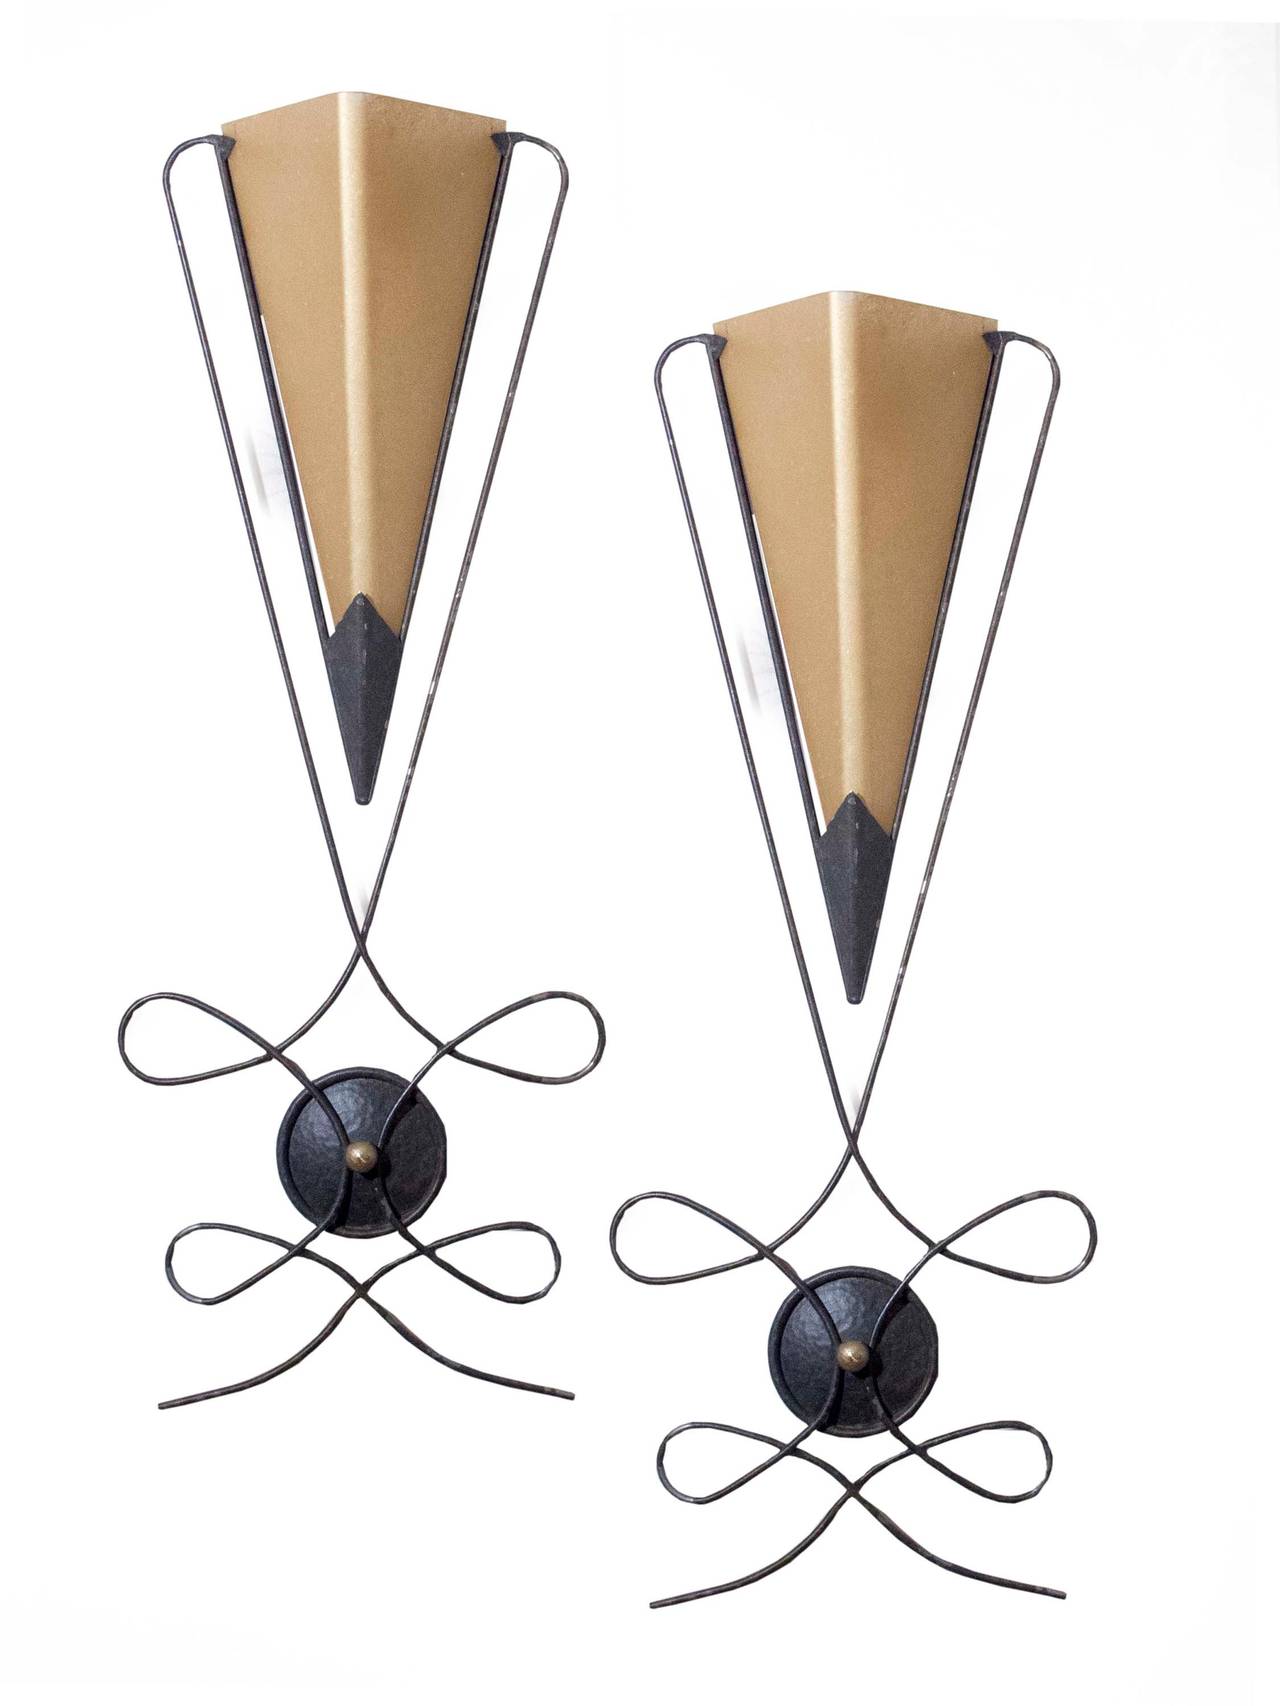 # ZA1077 - Decorative Mid-Century Modern pair of wall sconces. The triangular shaped translucent glass shades are framed by metal wire form trim above an interlocking playful design centering a roundel,
American, circa 1950.

Click on 